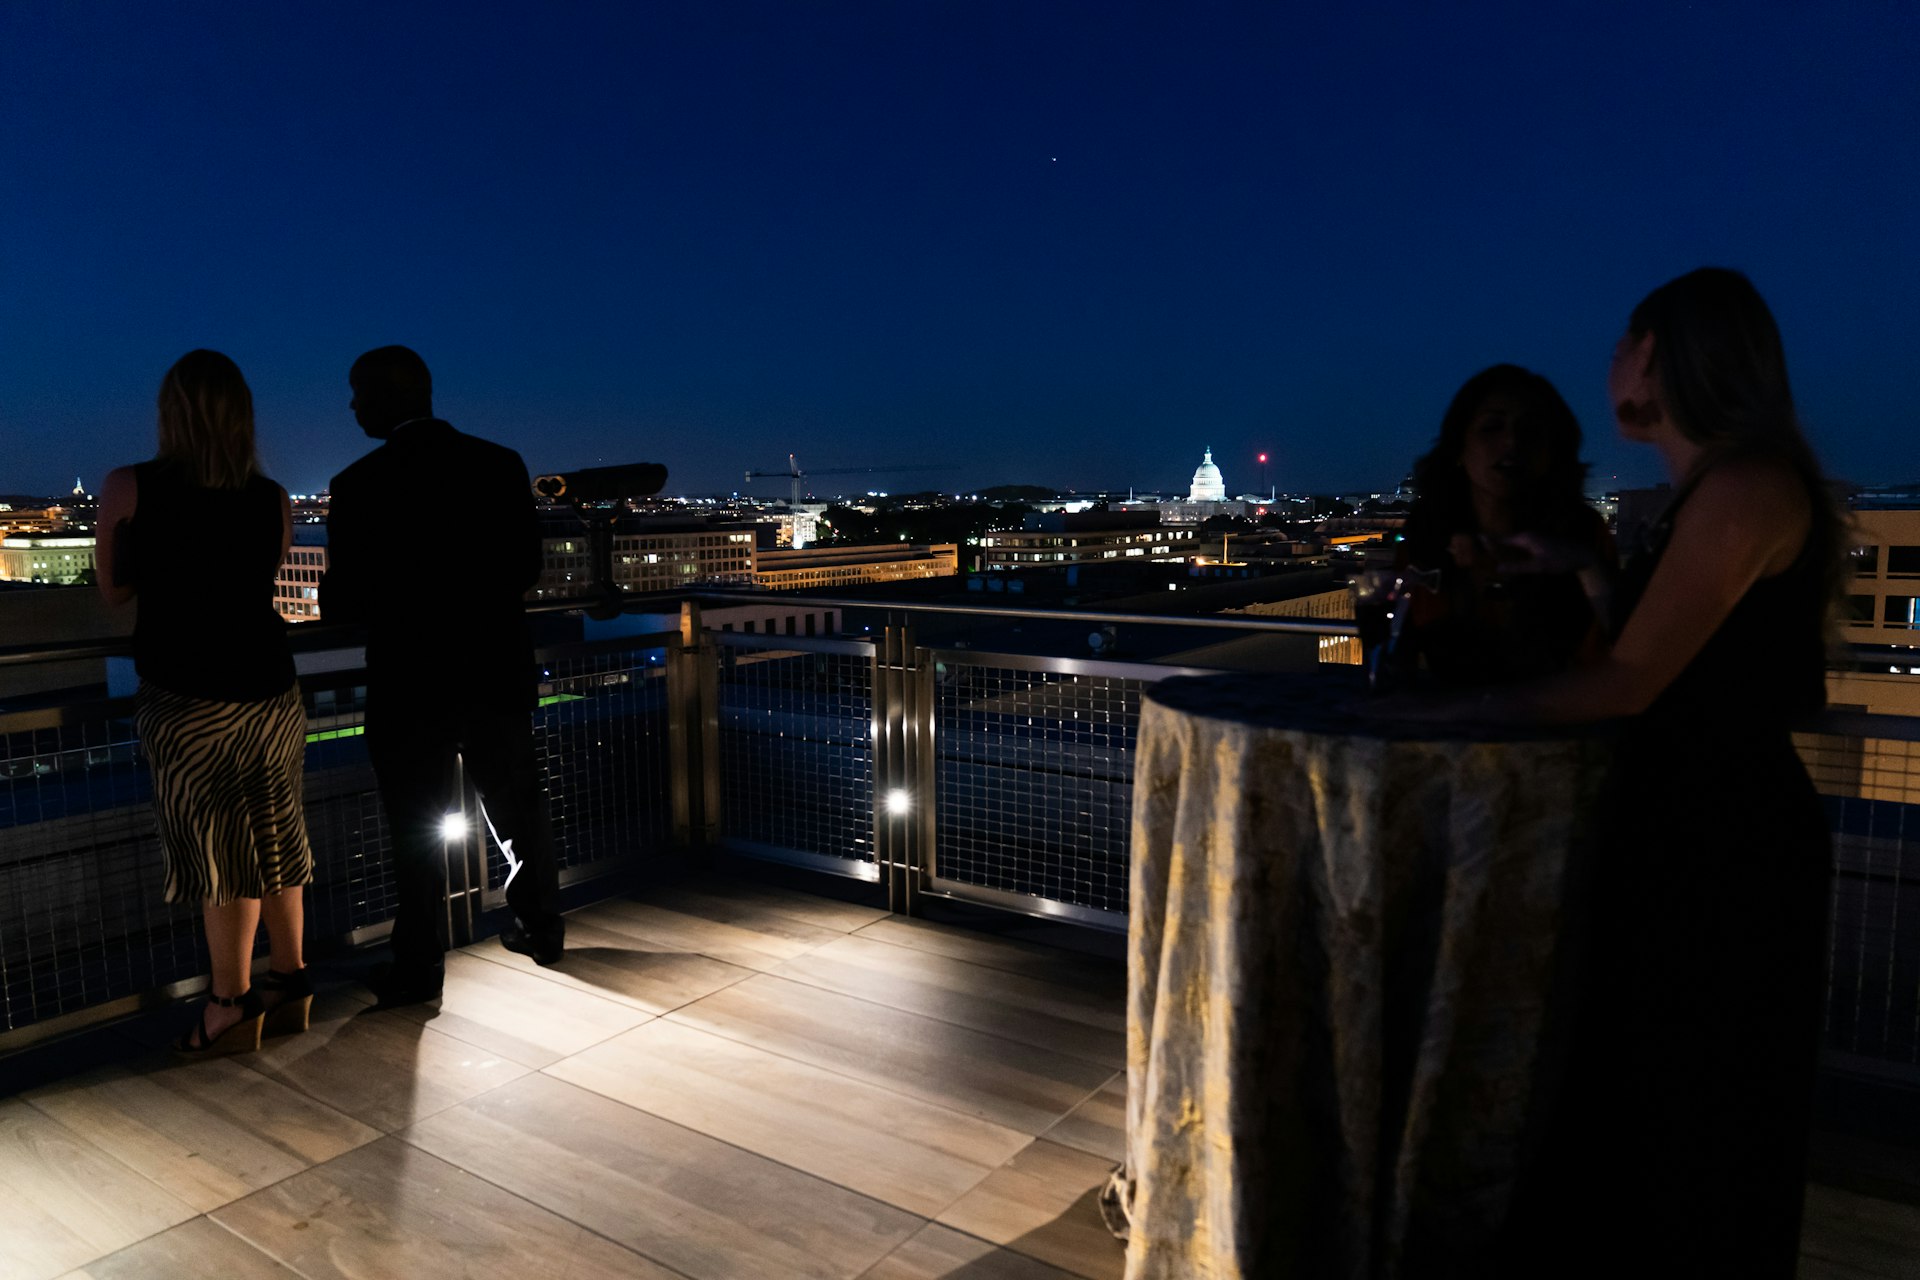 Rooftop views in Washington, DC overlooking the Washington Monument